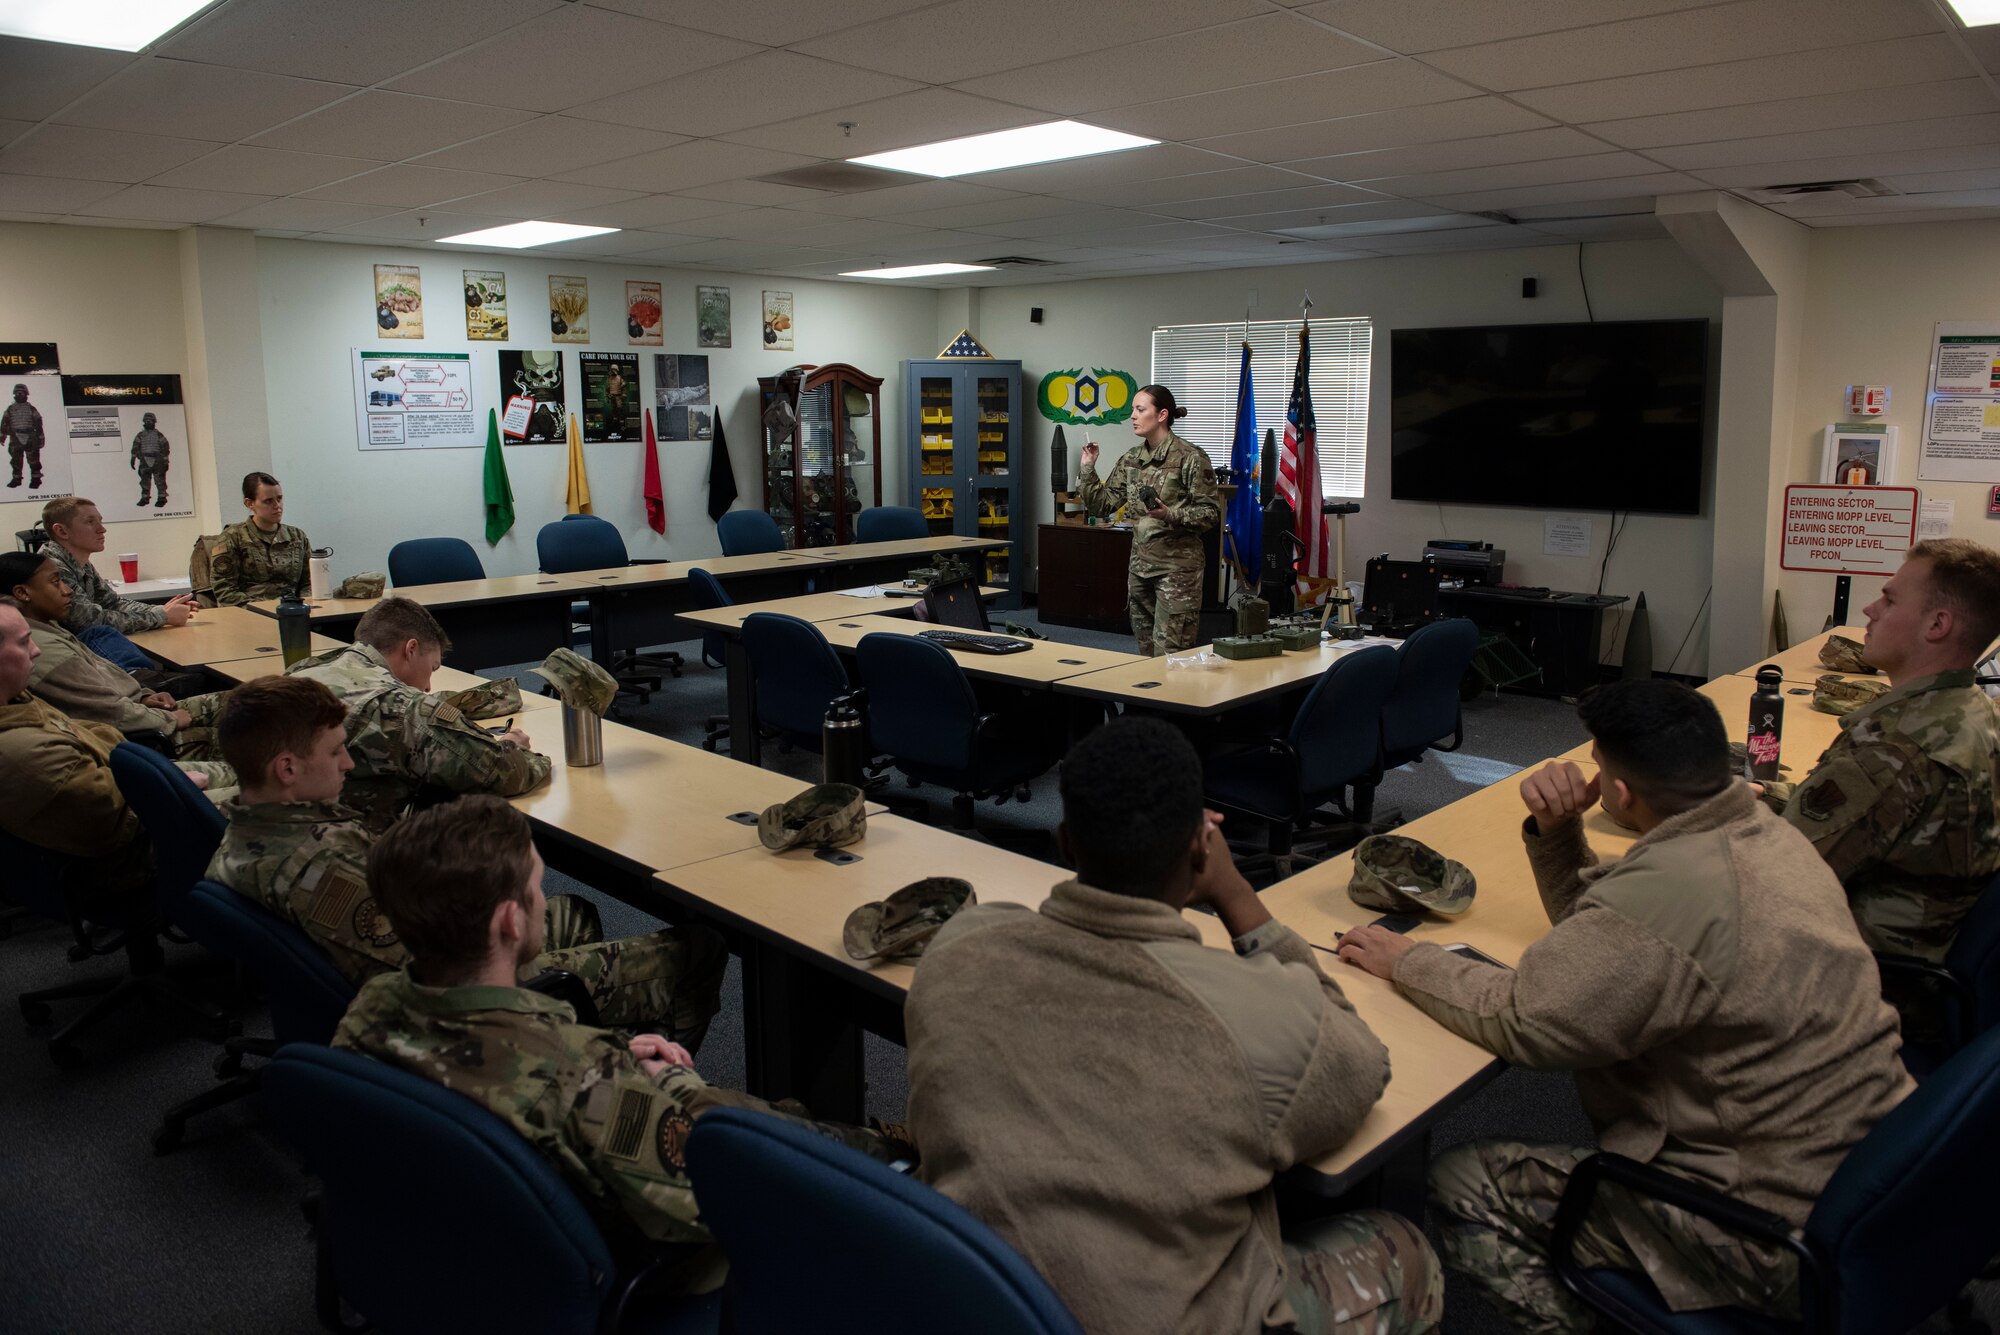 Airmen from the 366th Civil Engineer Squadron learn how to use Joint Chemical Agent Detectors during the Base Emergency Egineer Force training, Jan. 23, 2020, at Mountain Home Air Force Base, Idaho. JCAD systems are capable of detecting chemical vapor elements. (U.S. Air Force photo by Senior Airman Tyrell Hall)